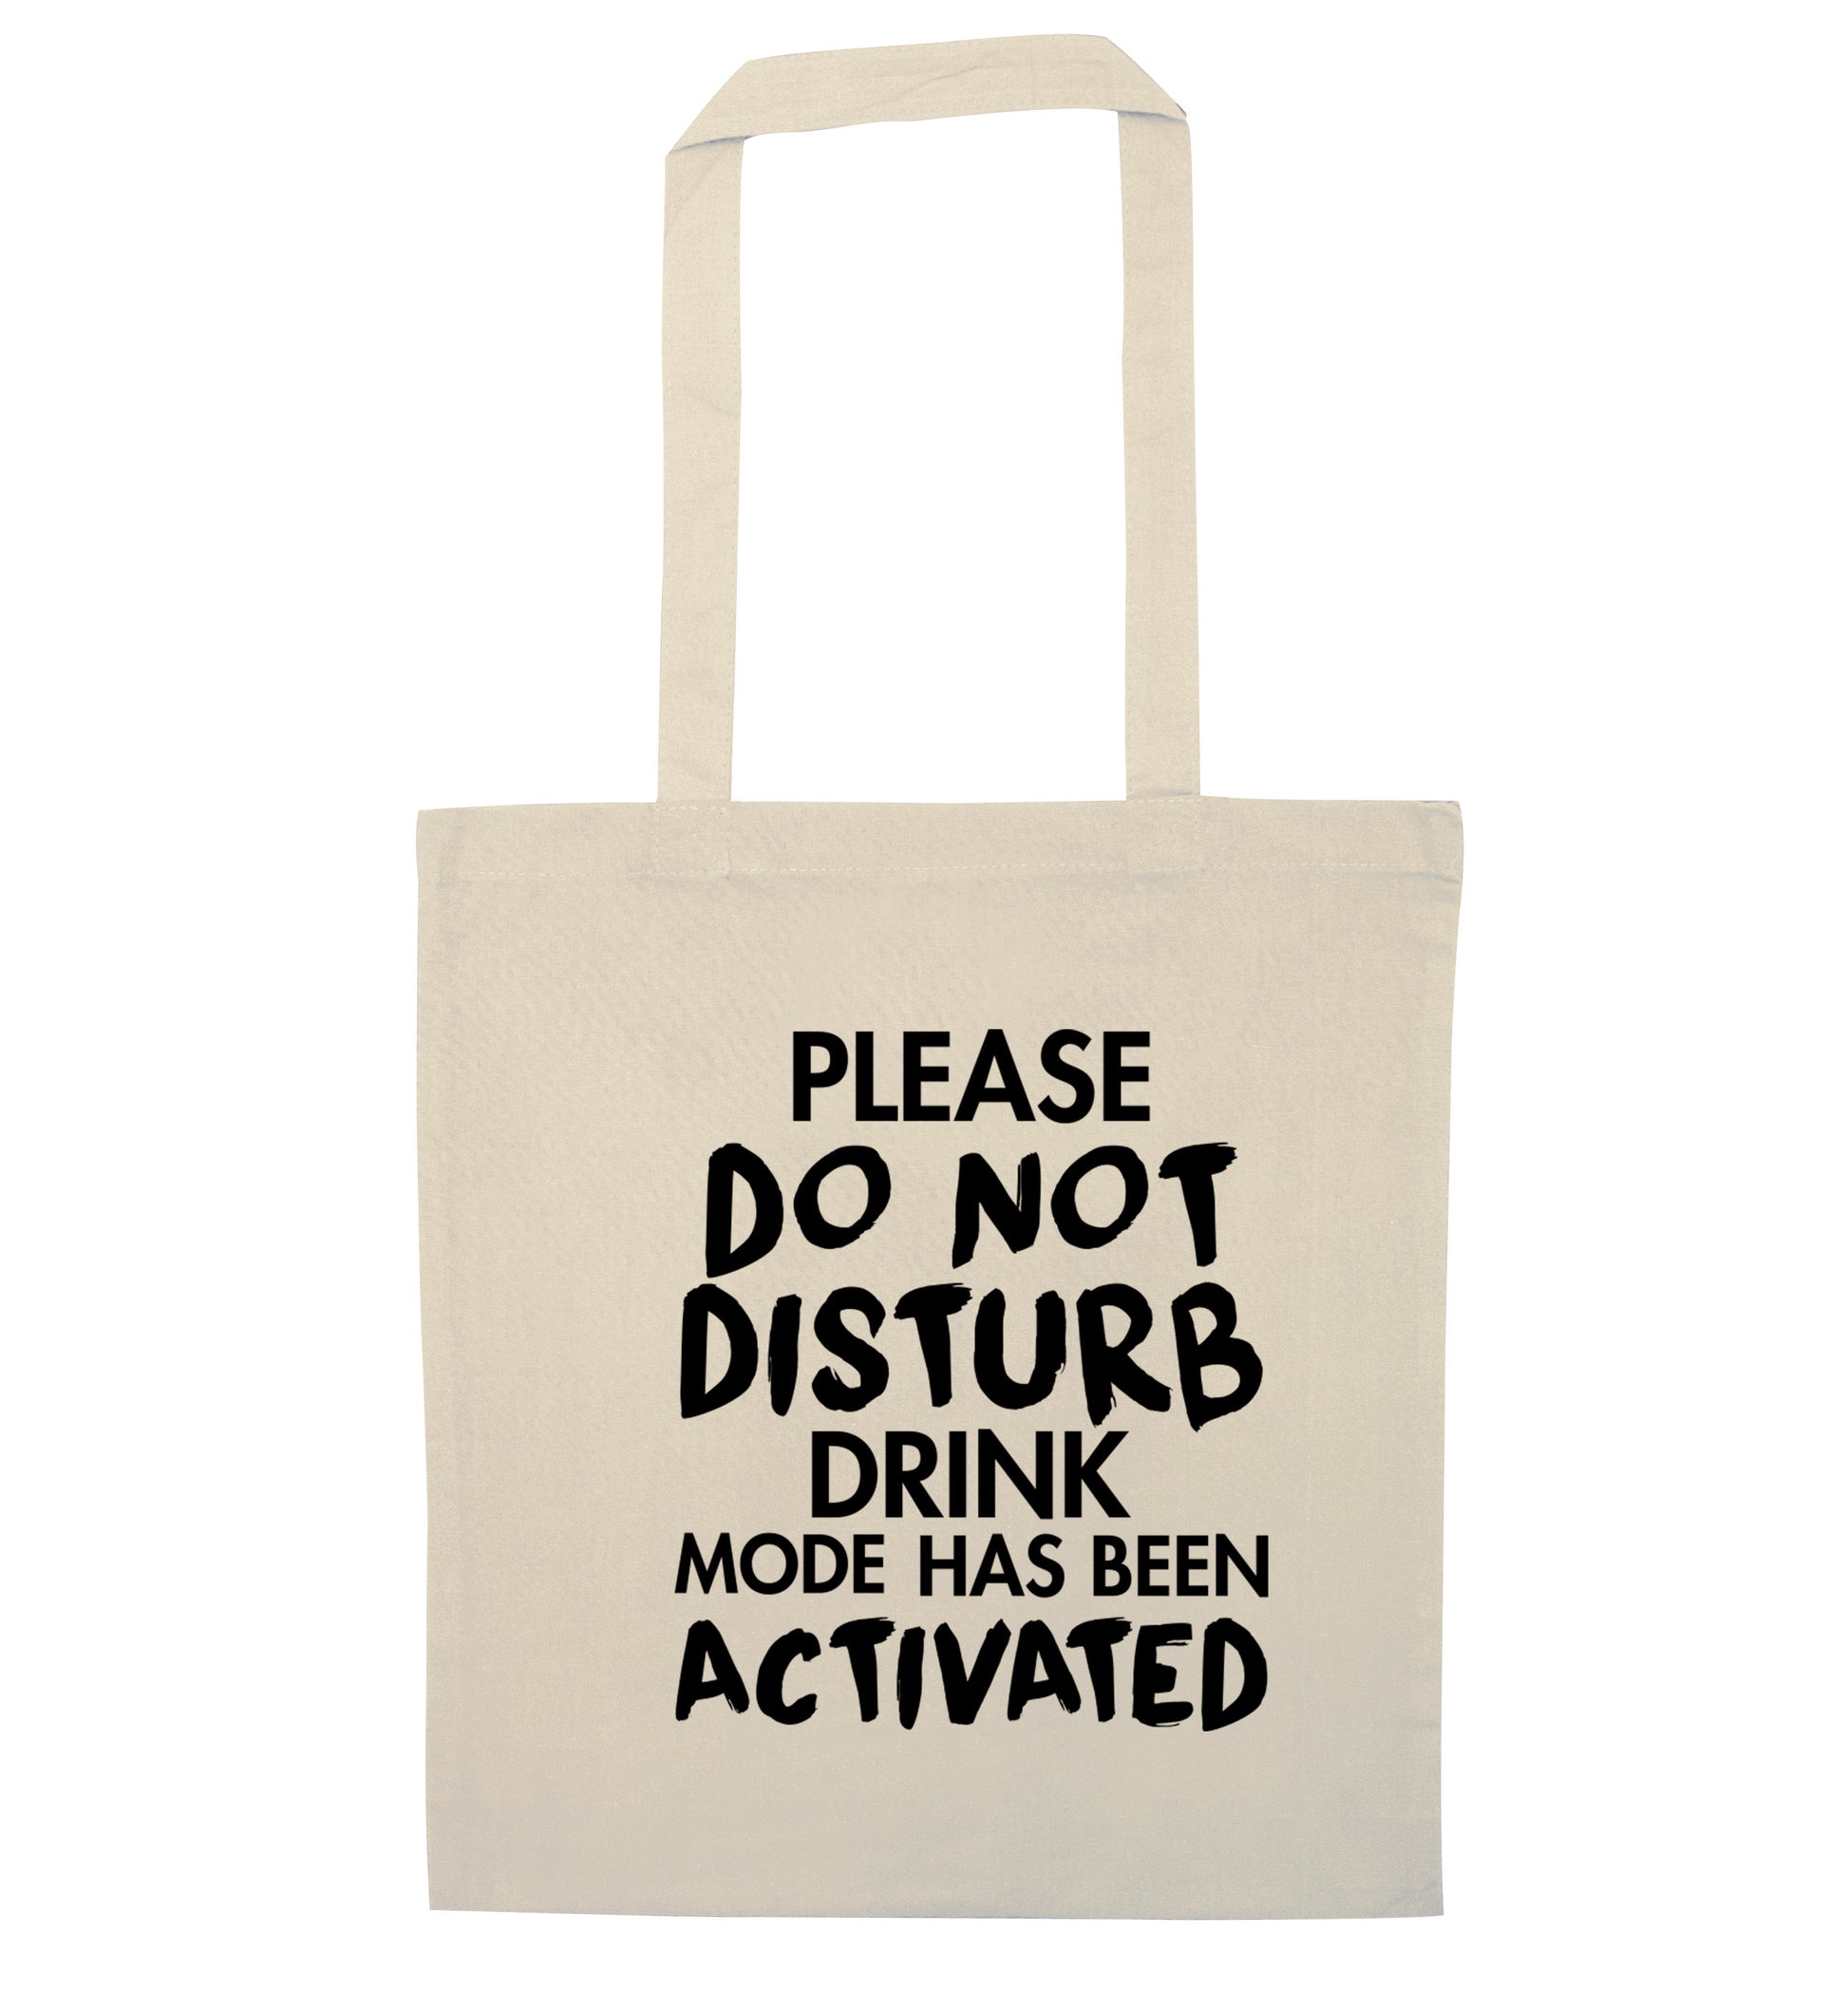 Please do not disturb drink mode has been activated natural tote bag